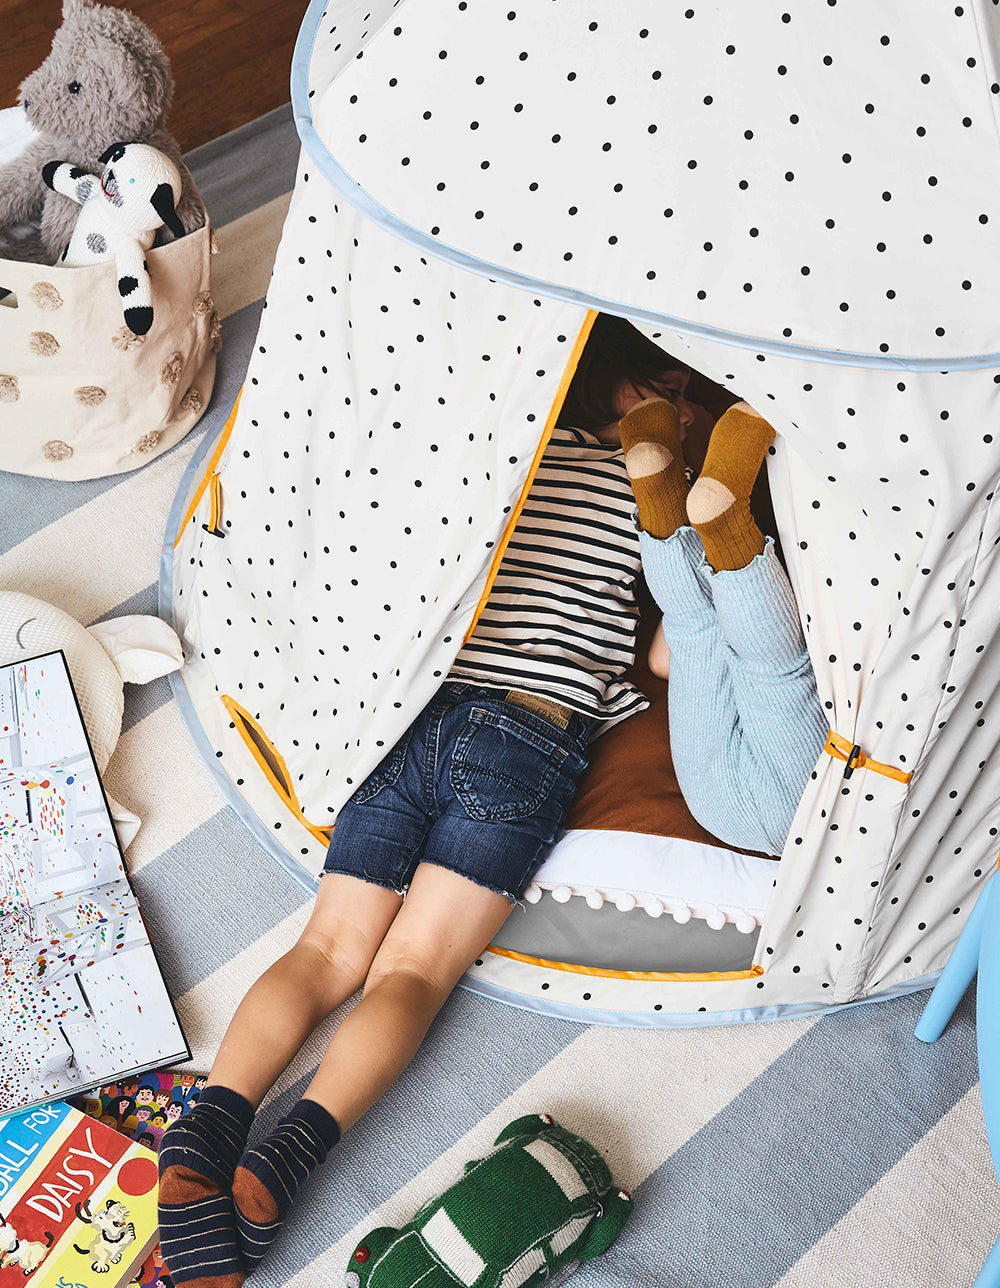 Dot Party Play Tent